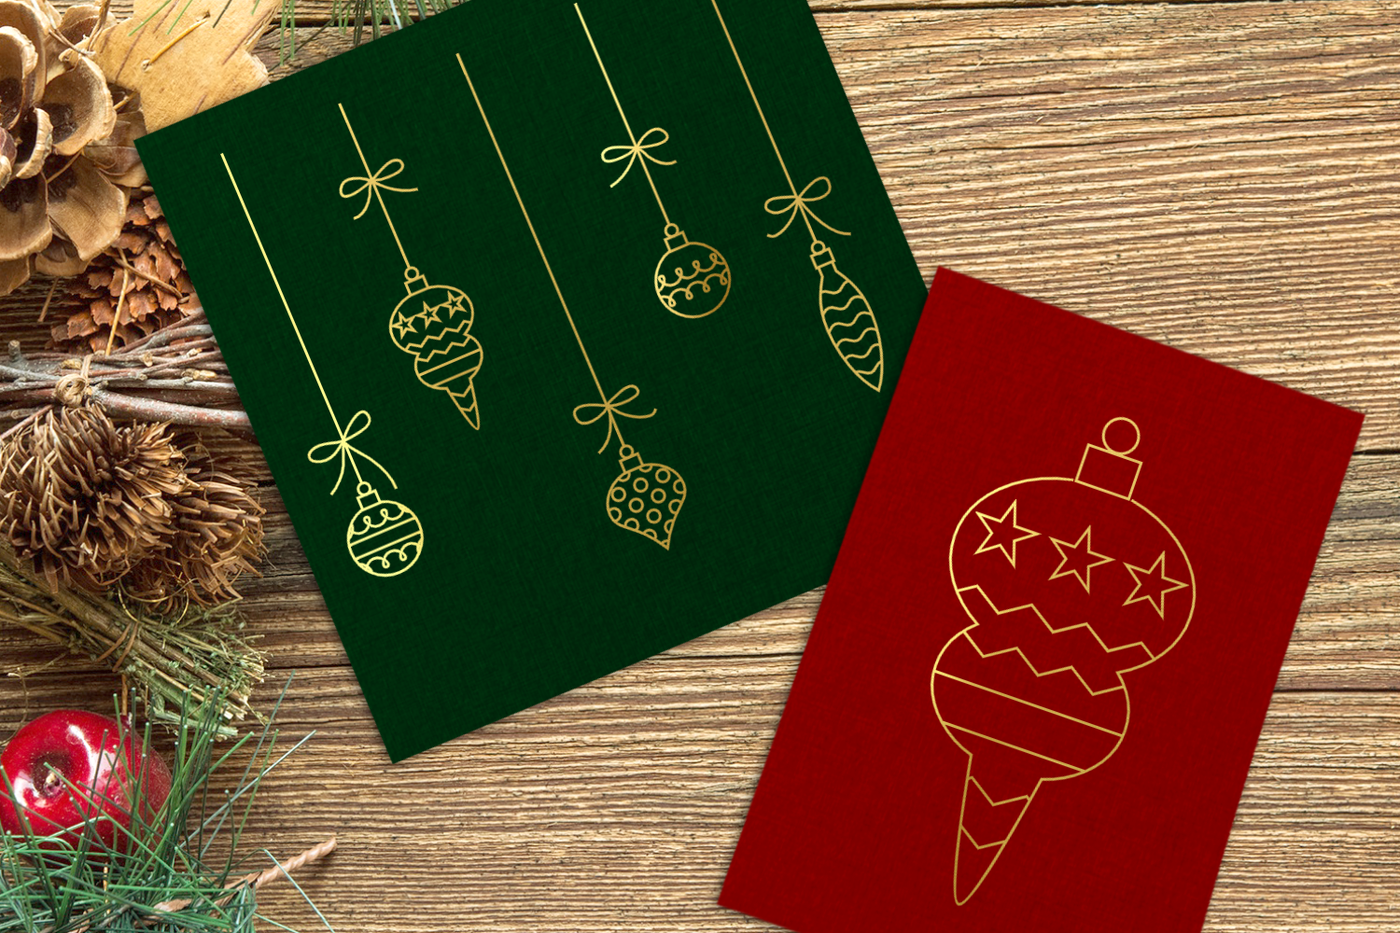 A green and red card sit on a wooden table with holiday greenery nearby. Each has a gold line drawing of holiday ornaments. The green card has multiple ornaments hanging from strings. The red card has a single larger fancy ornament.